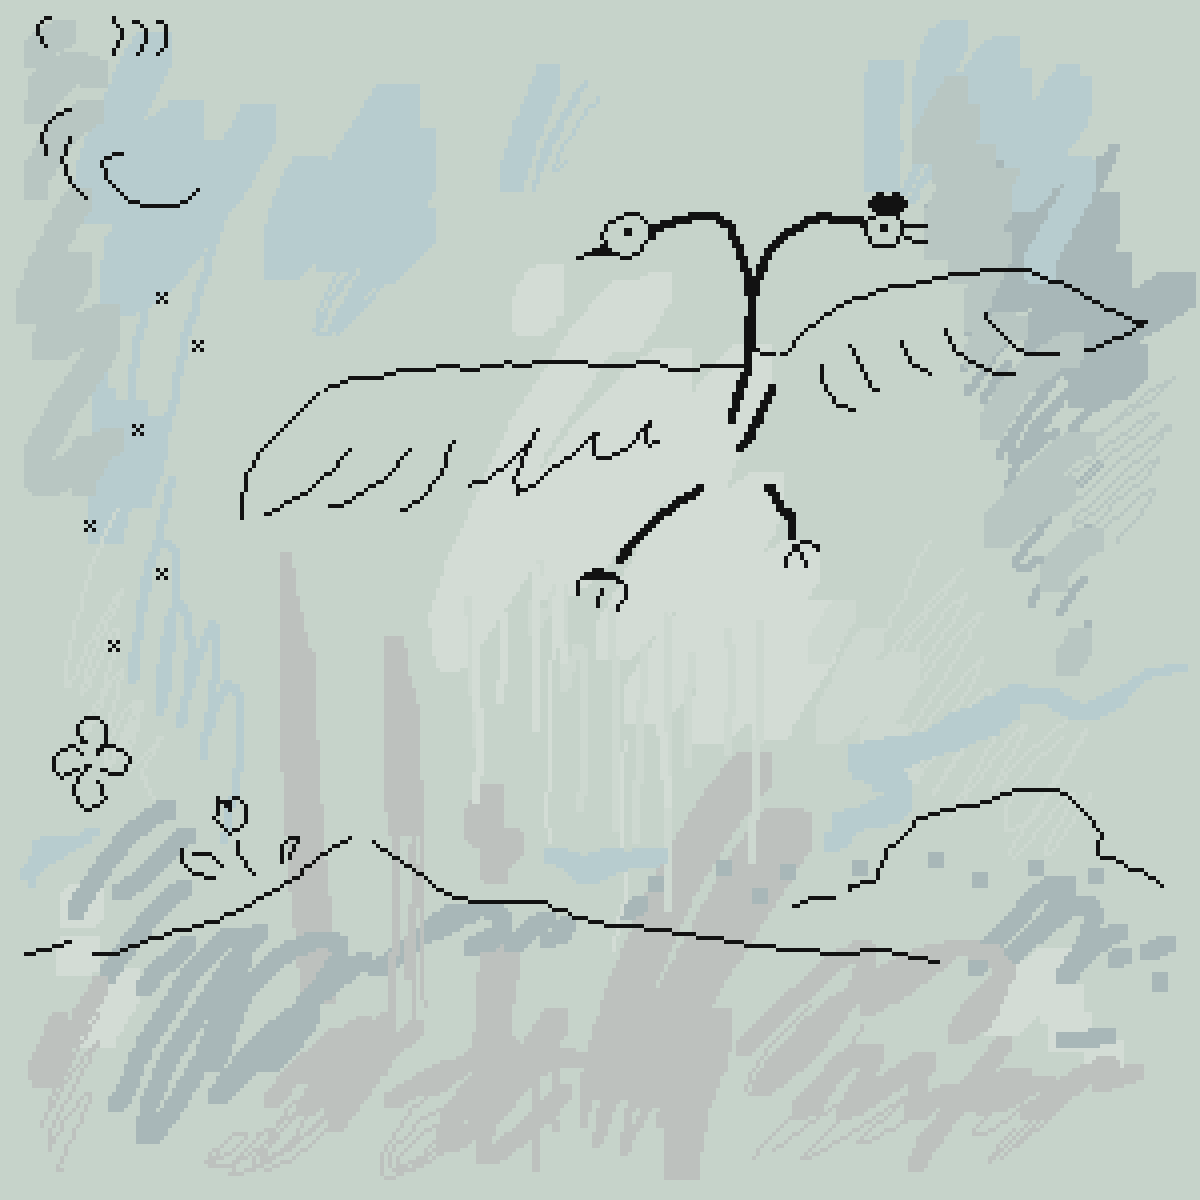 Drawing after an Exhibition Visit of Cy Twombly 
300*300p

#dailyart #pixelart #Digitalart